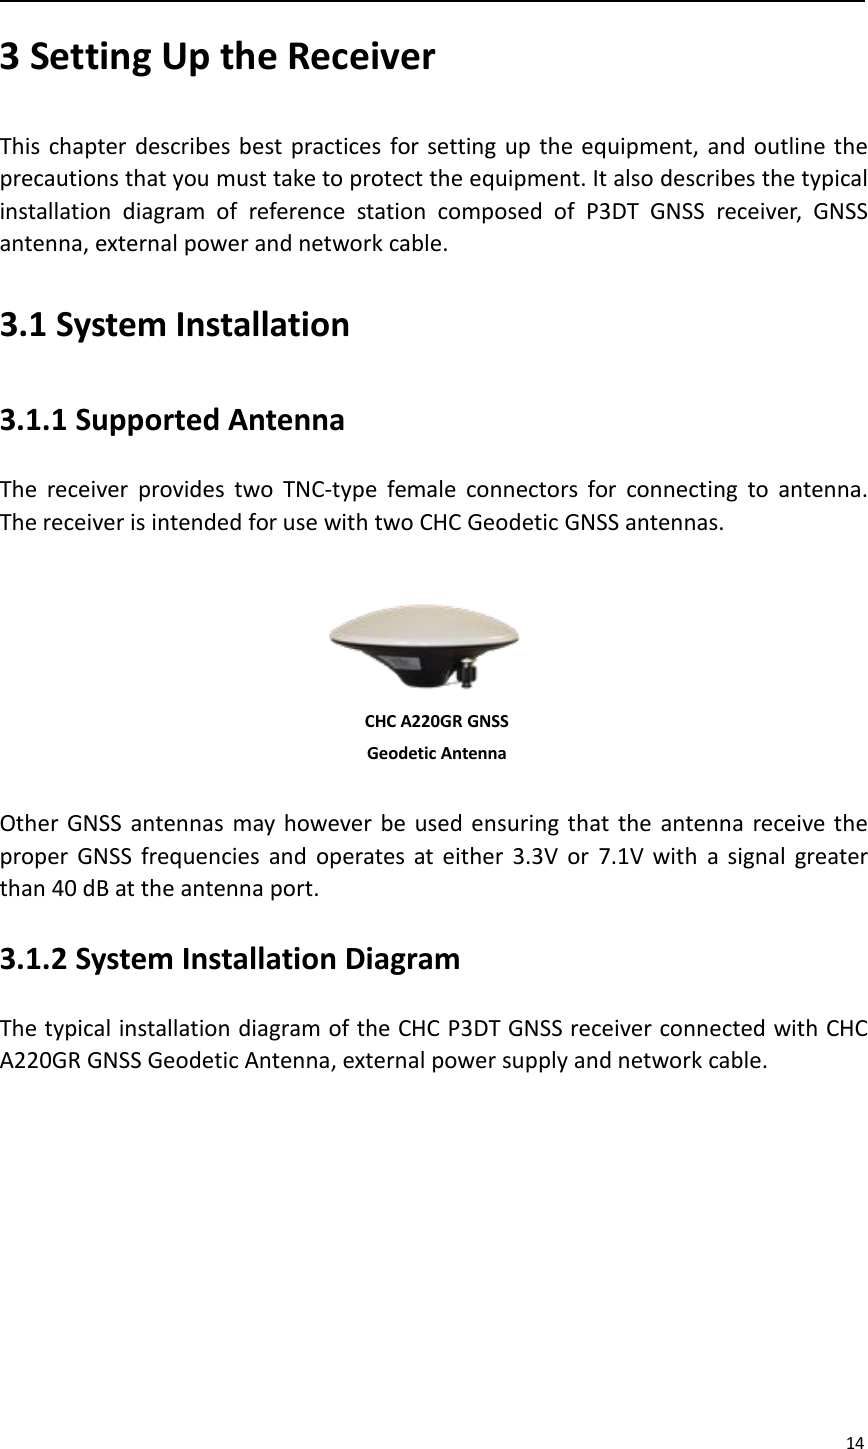 Page 14 of Huace Navigation Technology A02025 Geodetic GNSS Receiver P3DT User Manual 